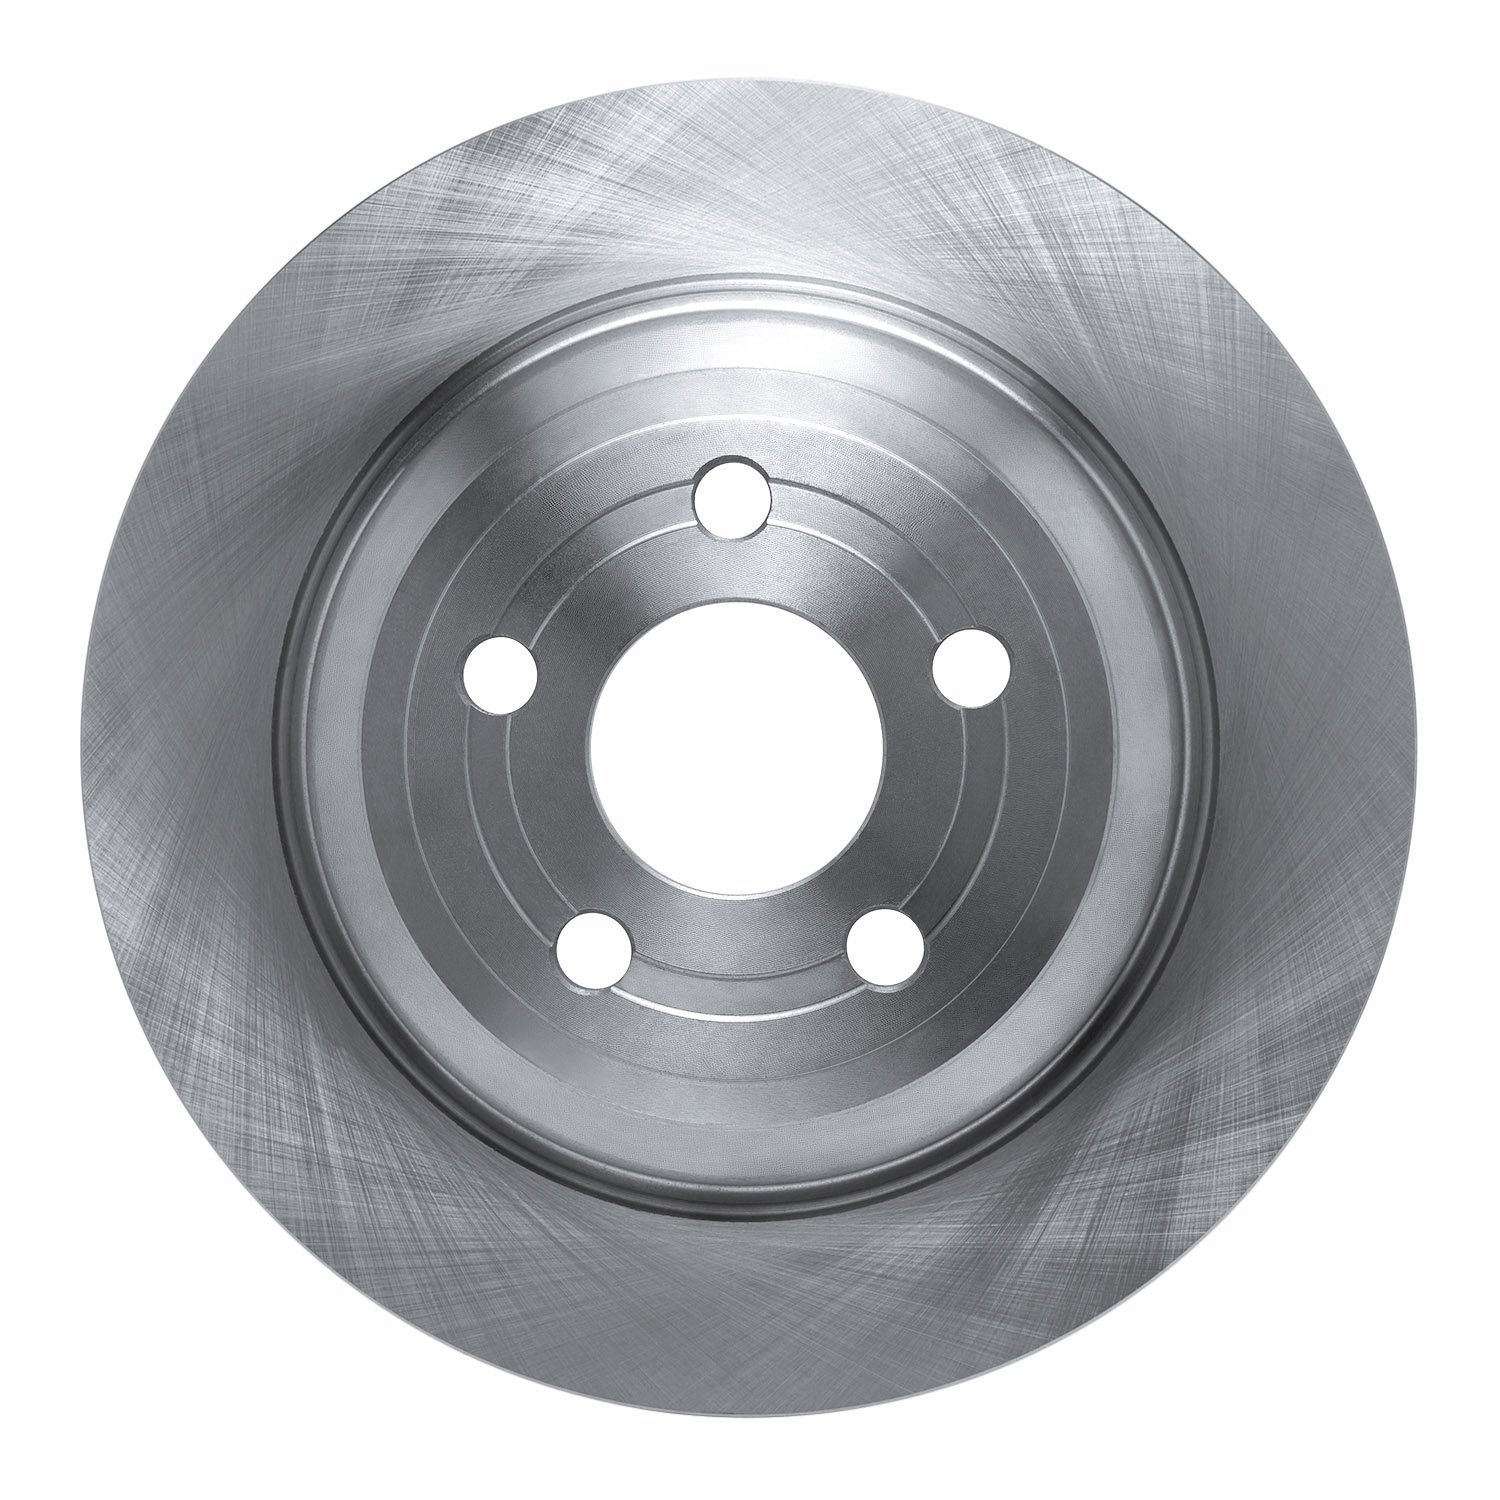 600-54297 Brake Rotor, Fits Select Ford/Lincoln/Mercury/Mazda, Position: Rear